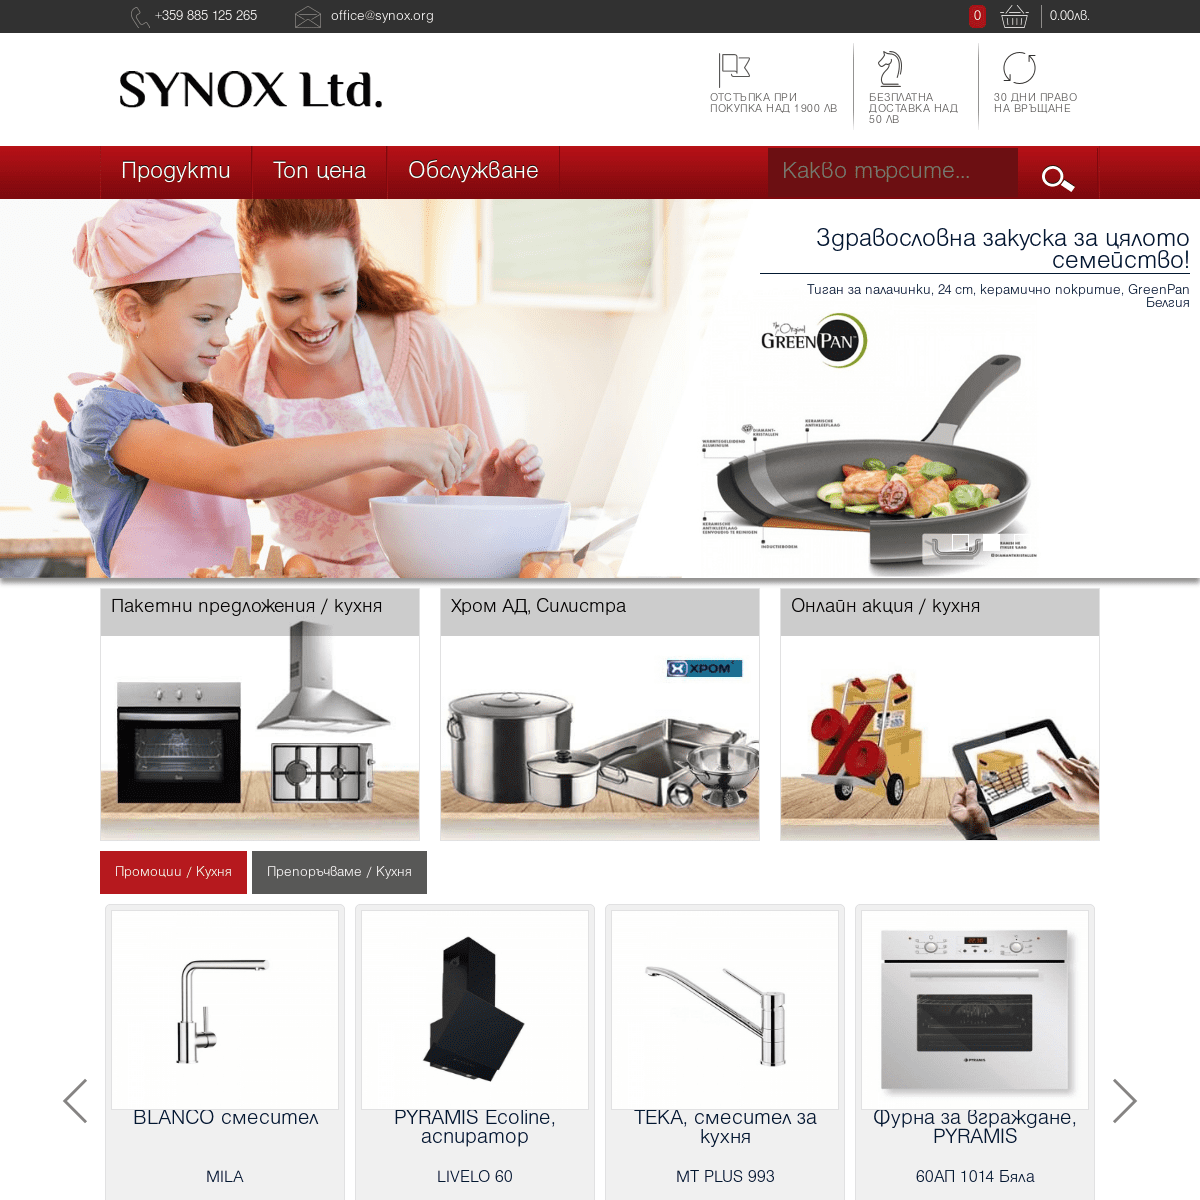 A complete backup of synox.org